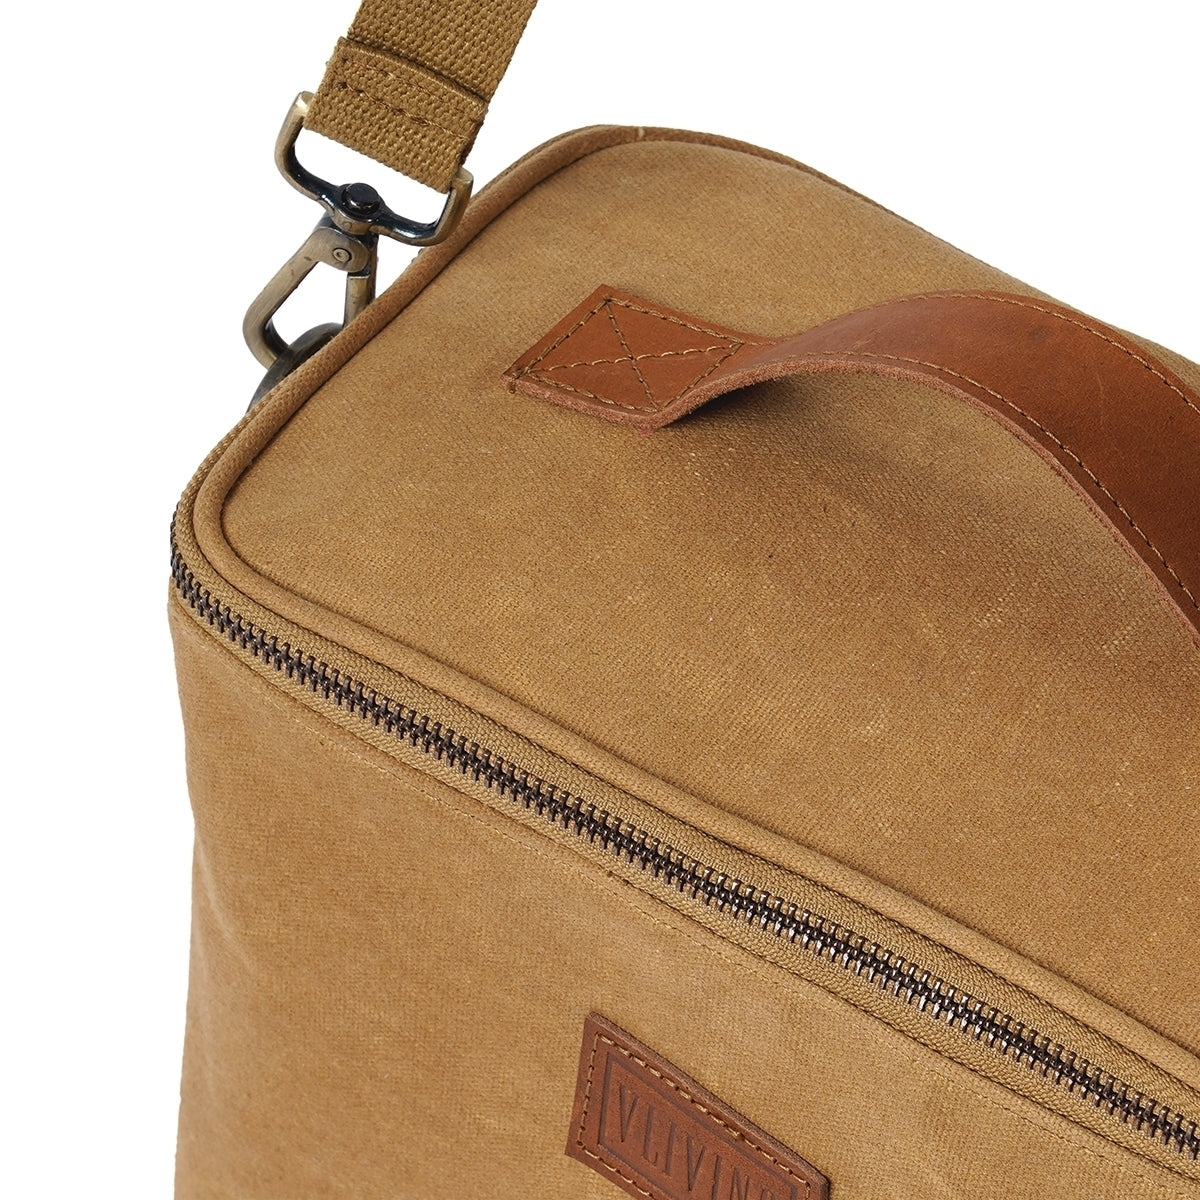 Sand Brown waxed canvas lunch bag, snack bag, with insulation lining, 9.5X8.5X5 inches